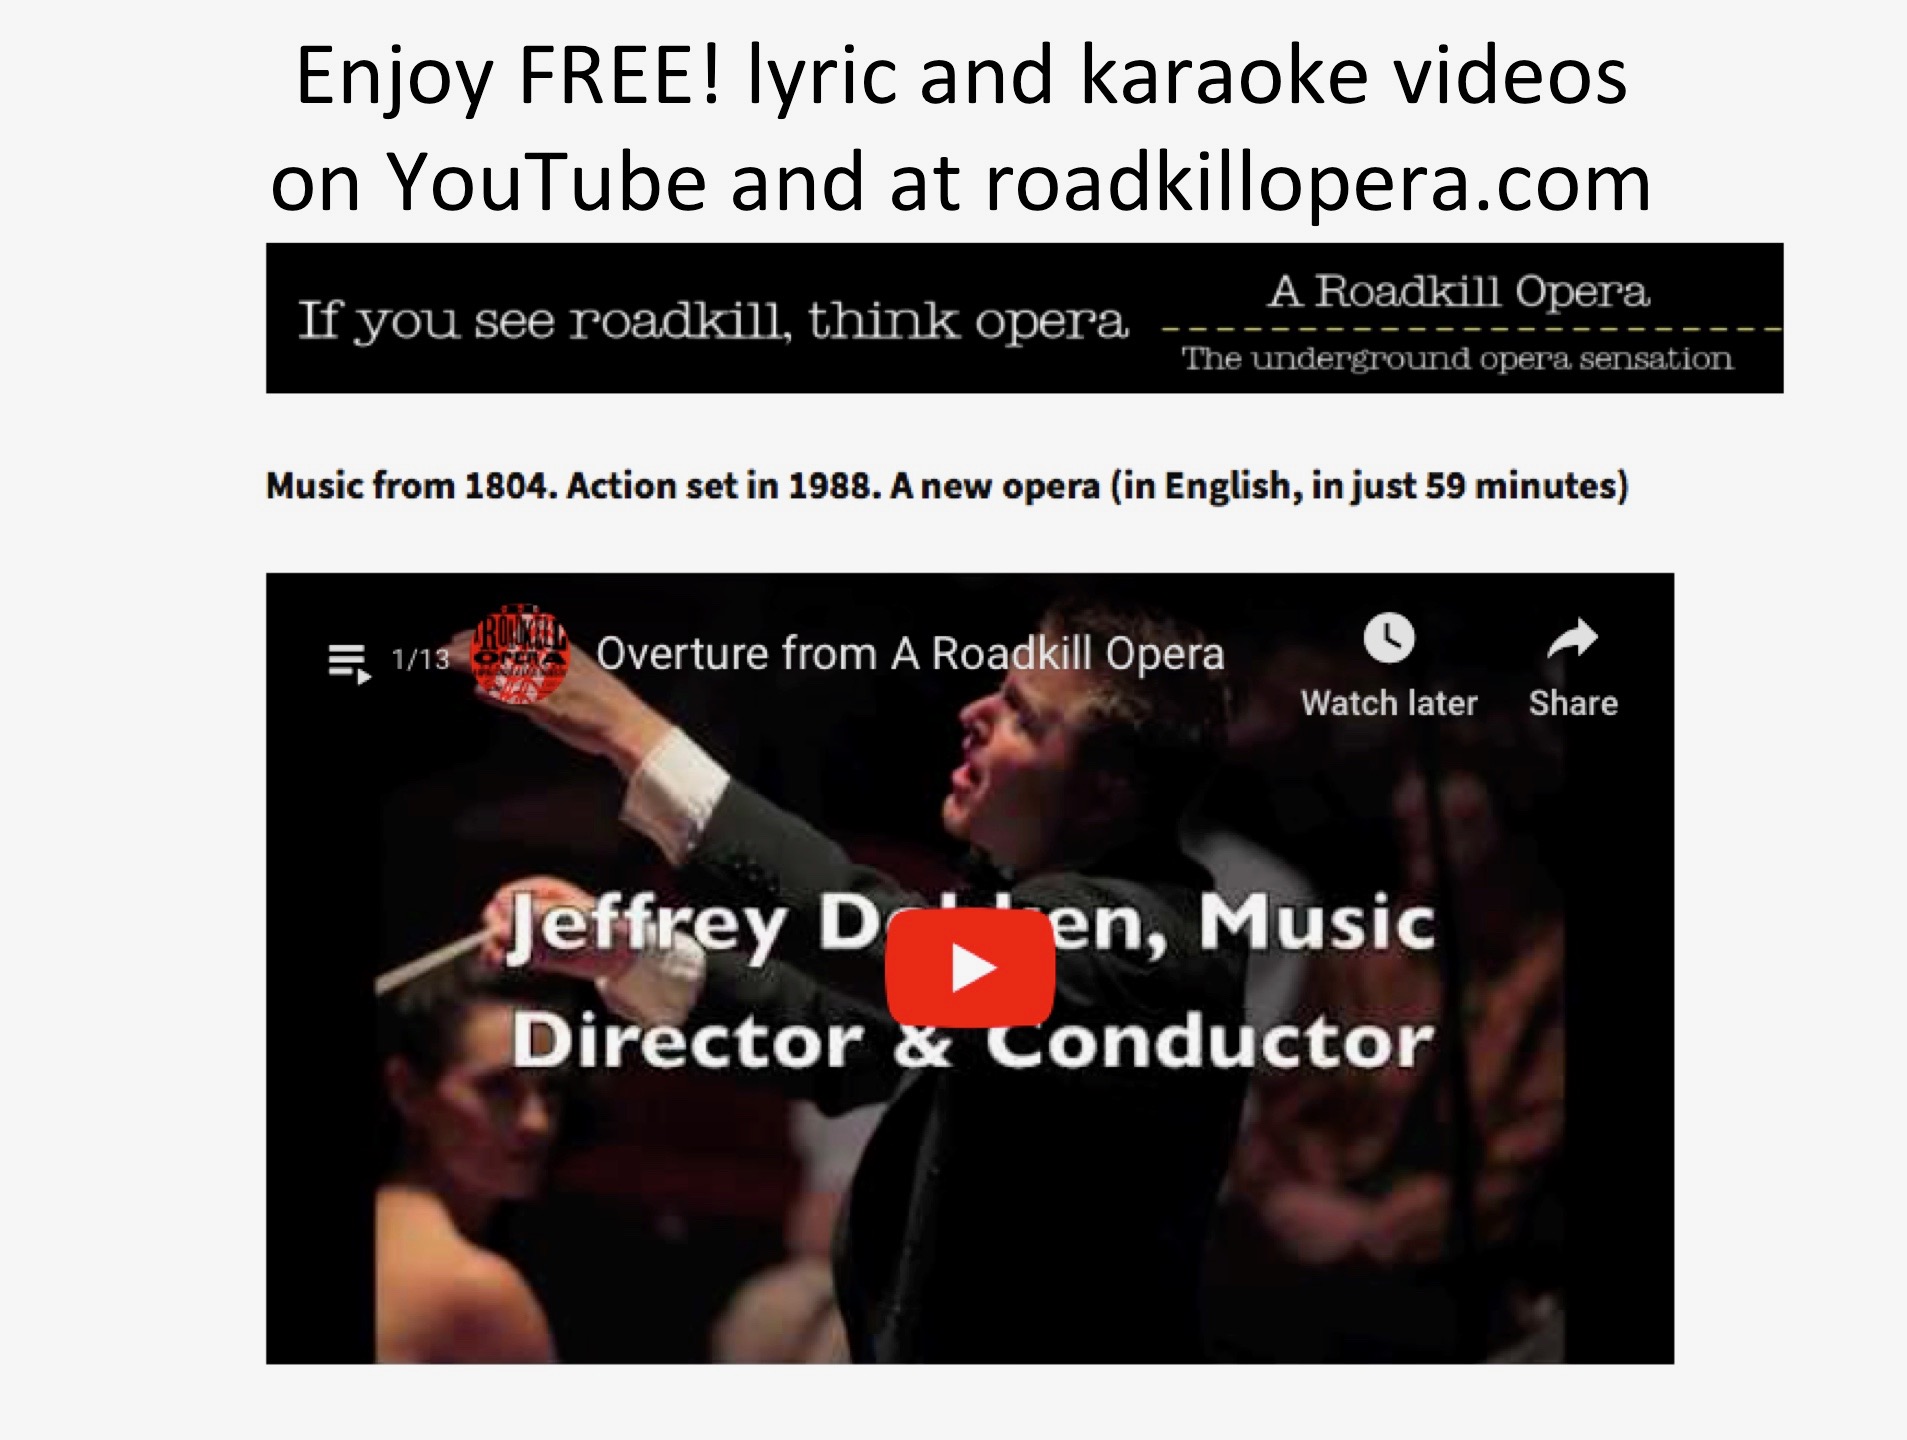 Photo of YouTube video of the Overture from A Roadkill Opera showing Jeffery Dokken, Music Director & Conductor.